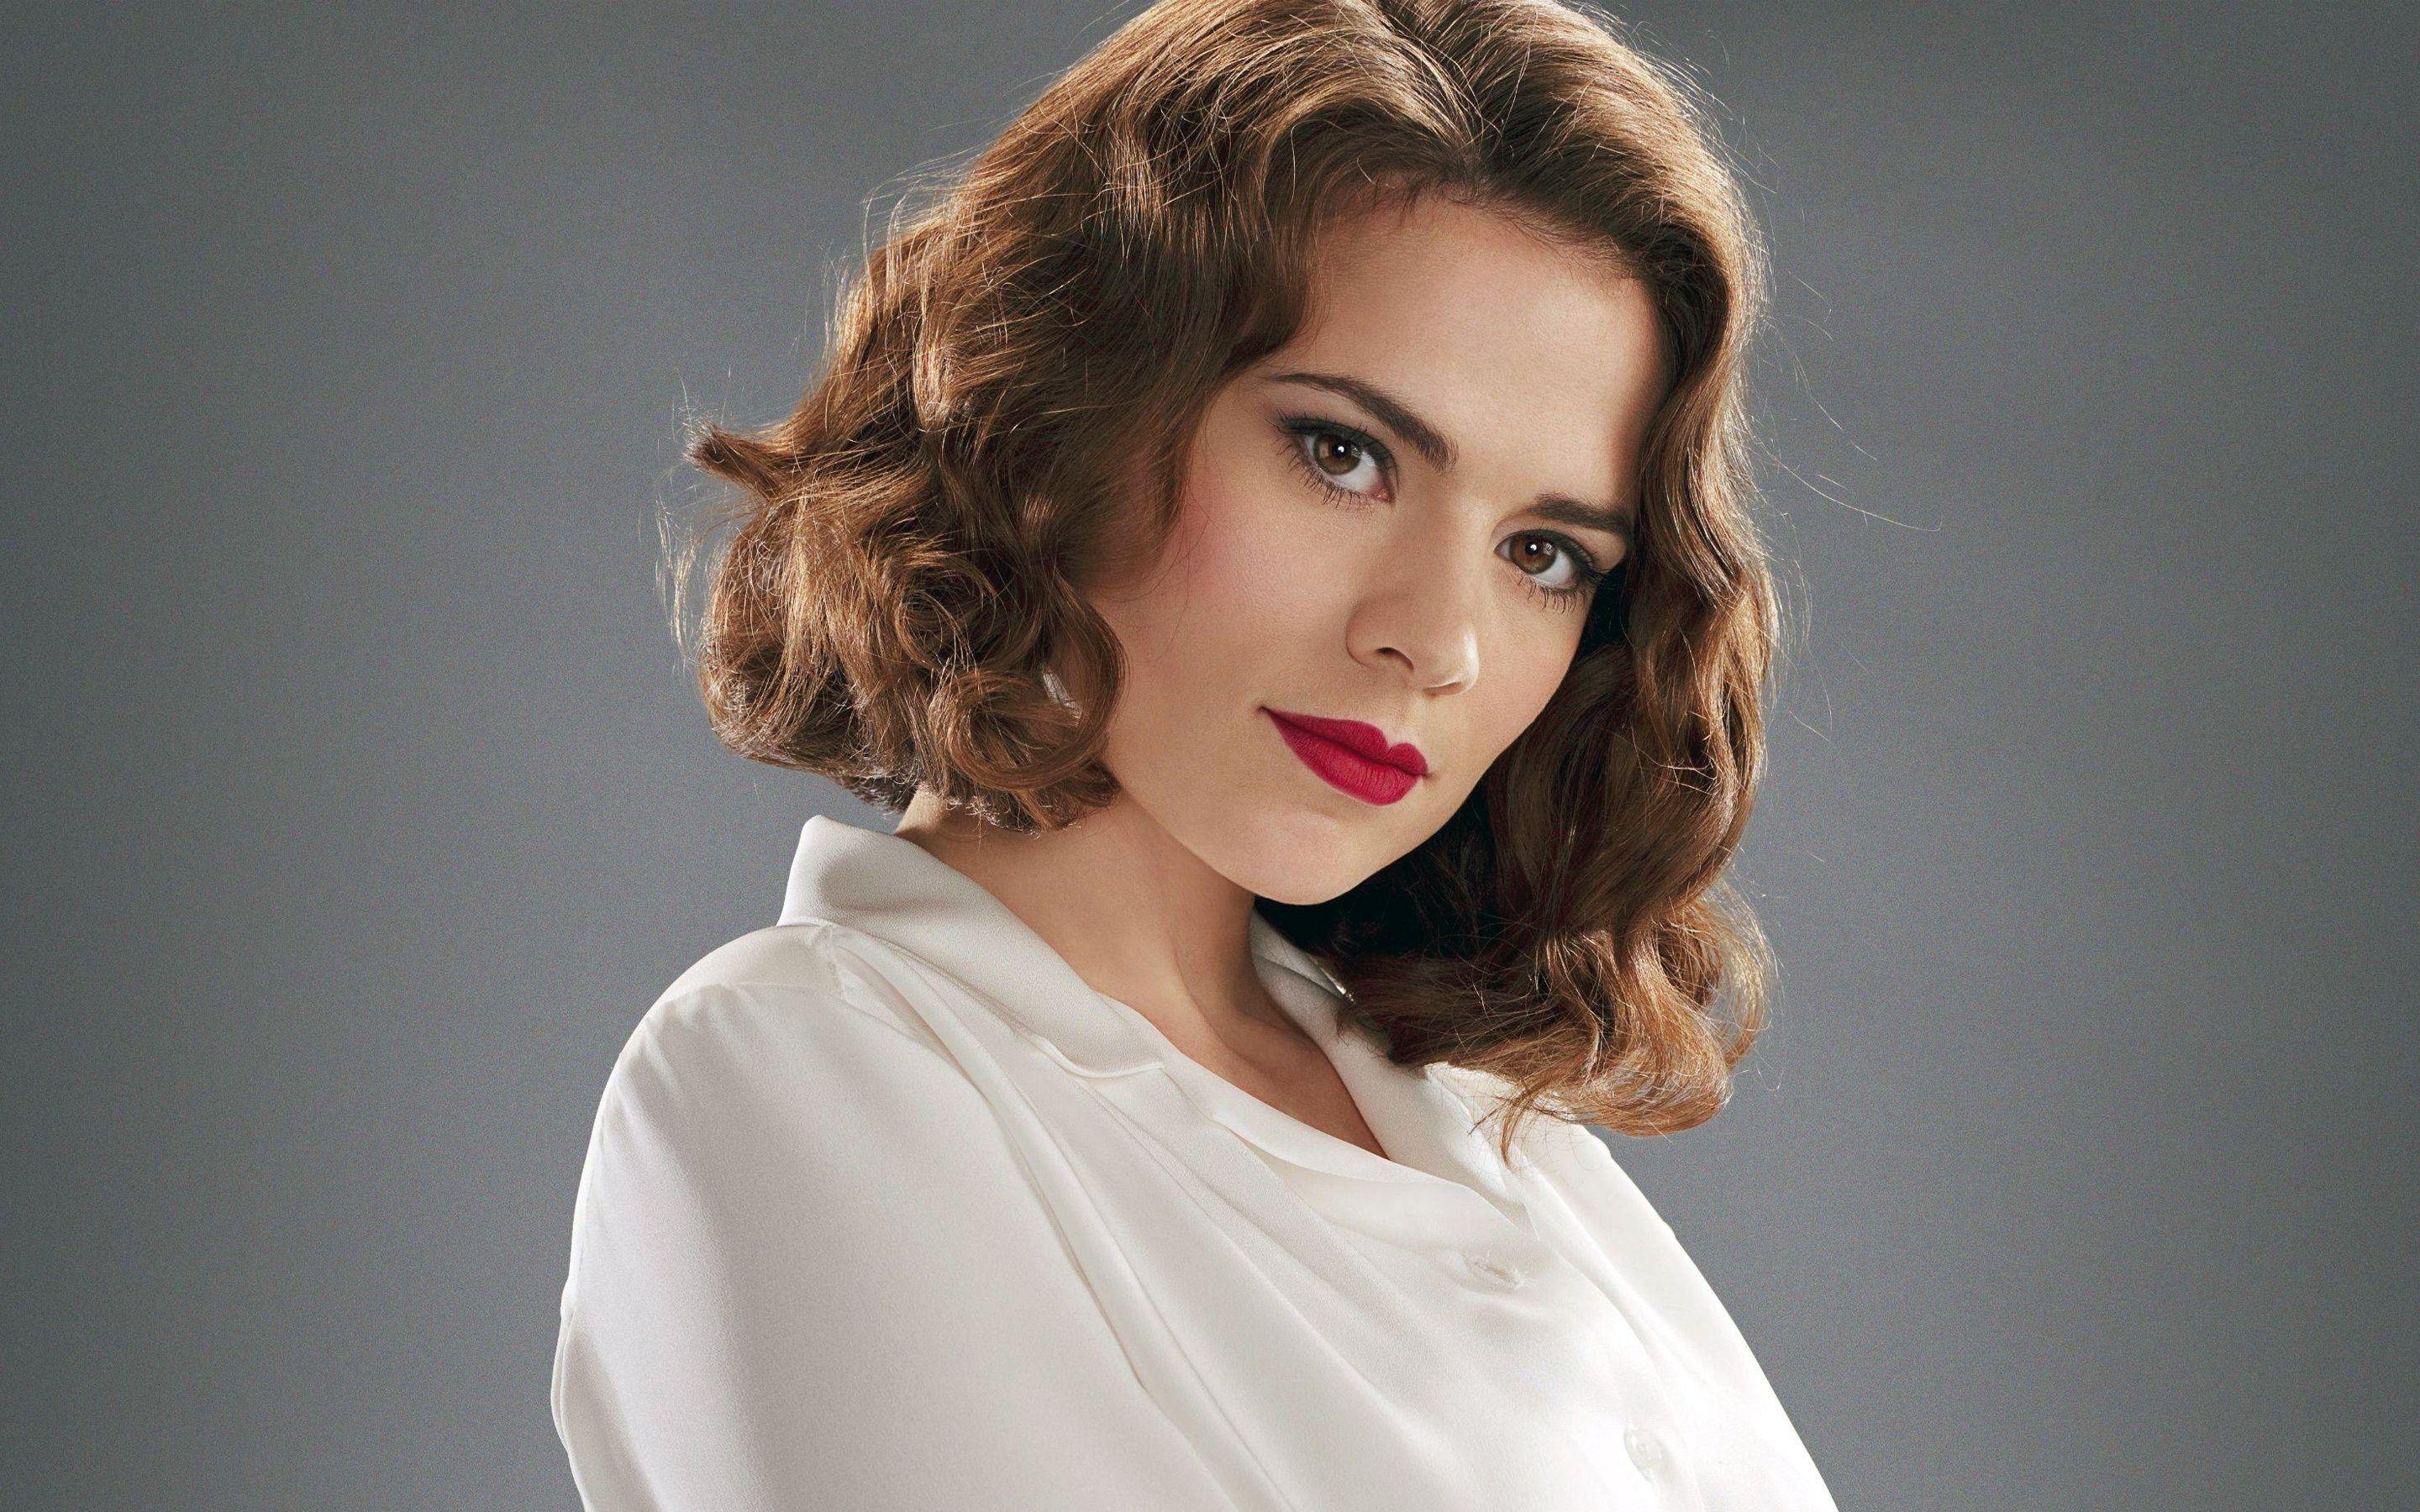 Hayley Atwell Peggy Carter Wallpaper in jpg format for free download